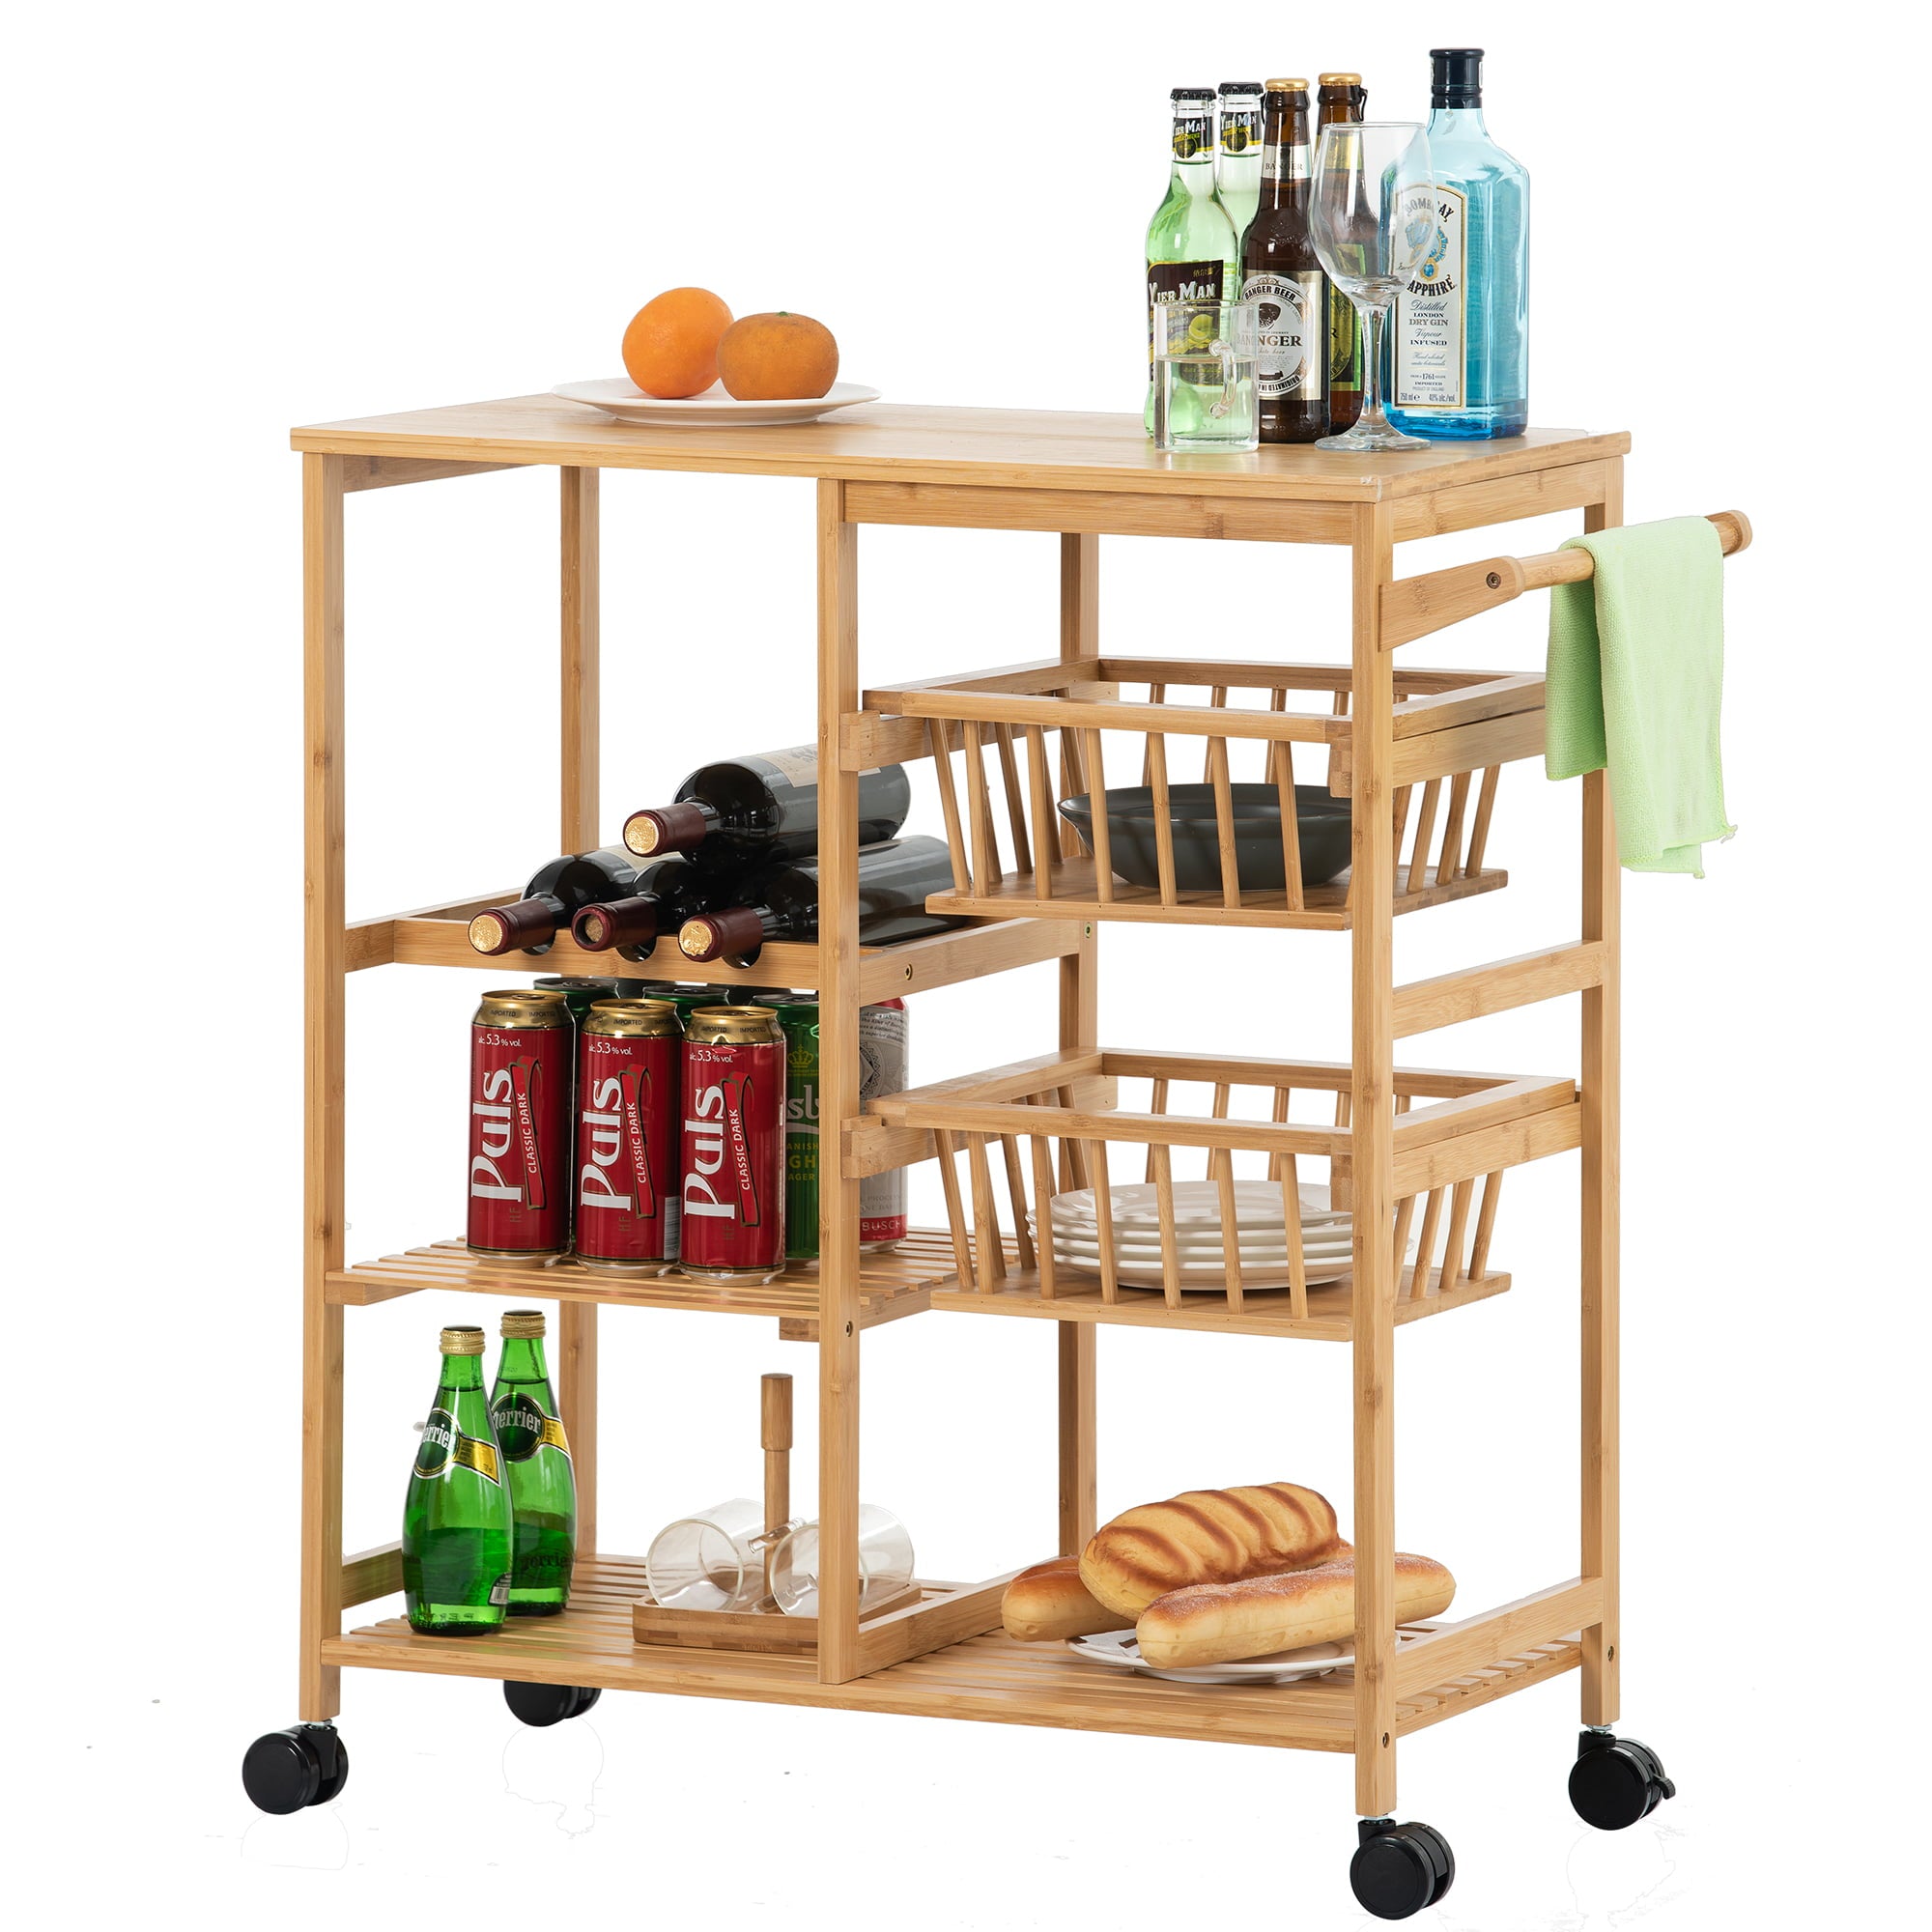 Bamboo Dining Cart， Kitchen Island Cart with Wood Tabletop， 4-Tier Rolling Storage Cart on Wheels， with Open Shelves and Basket Drawers for Home， Dining Room， Office， Restaurant， Hotel， L0485